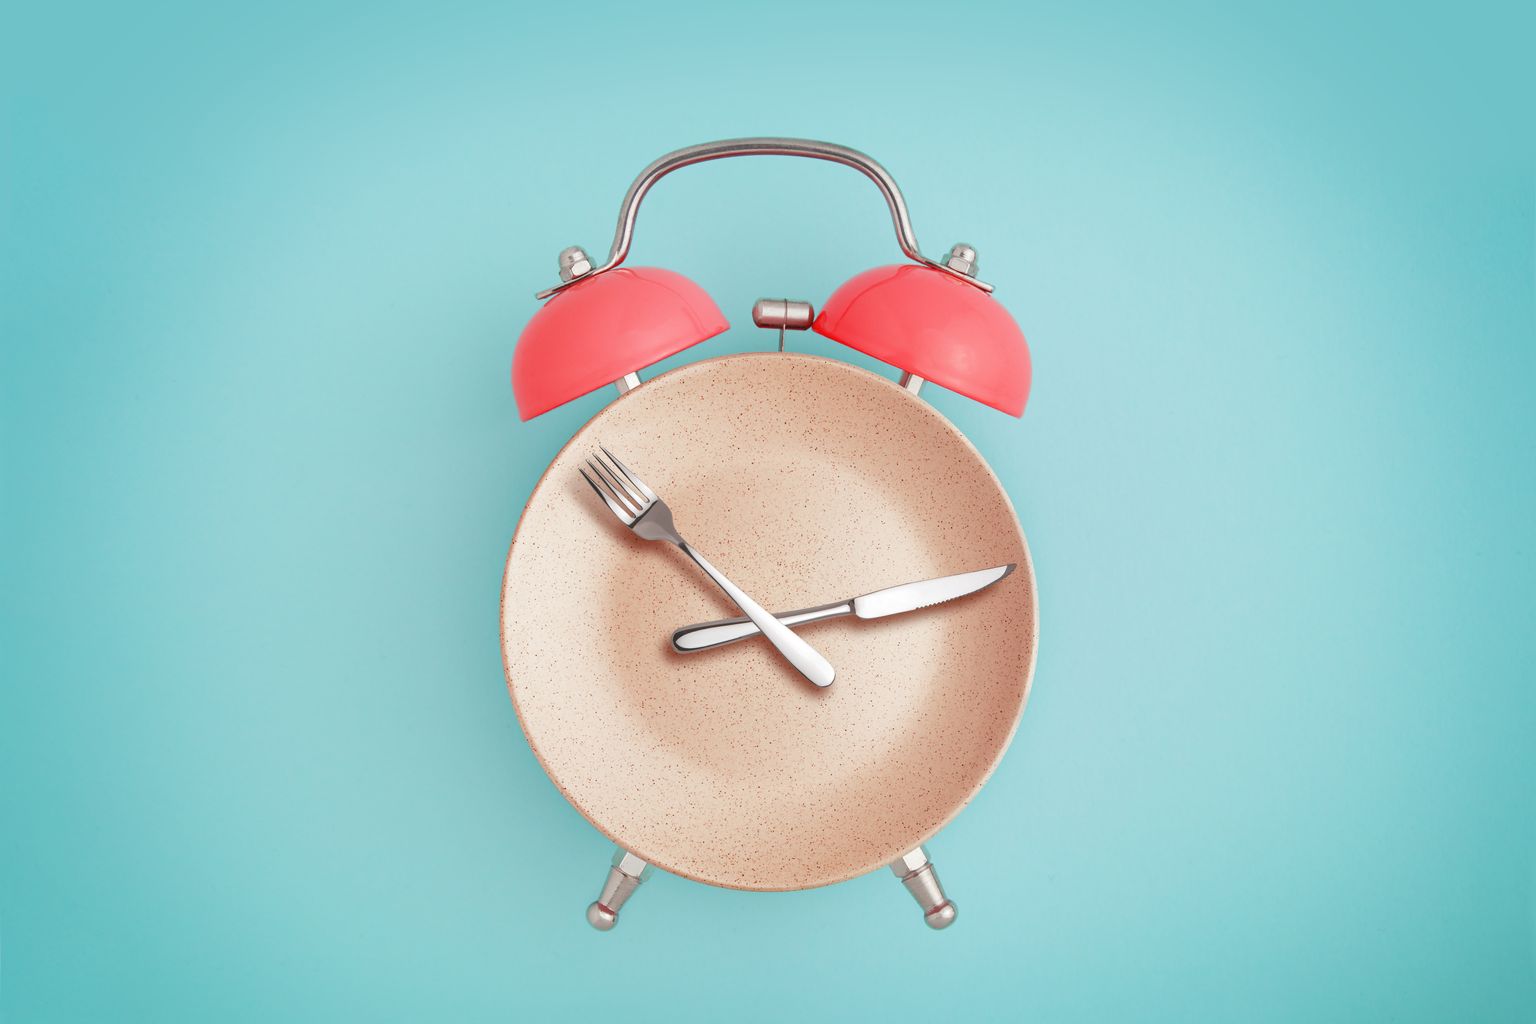 Alarm clock and plate with cutlery . concept of intermittent fasting, lunch, diet and weight loss